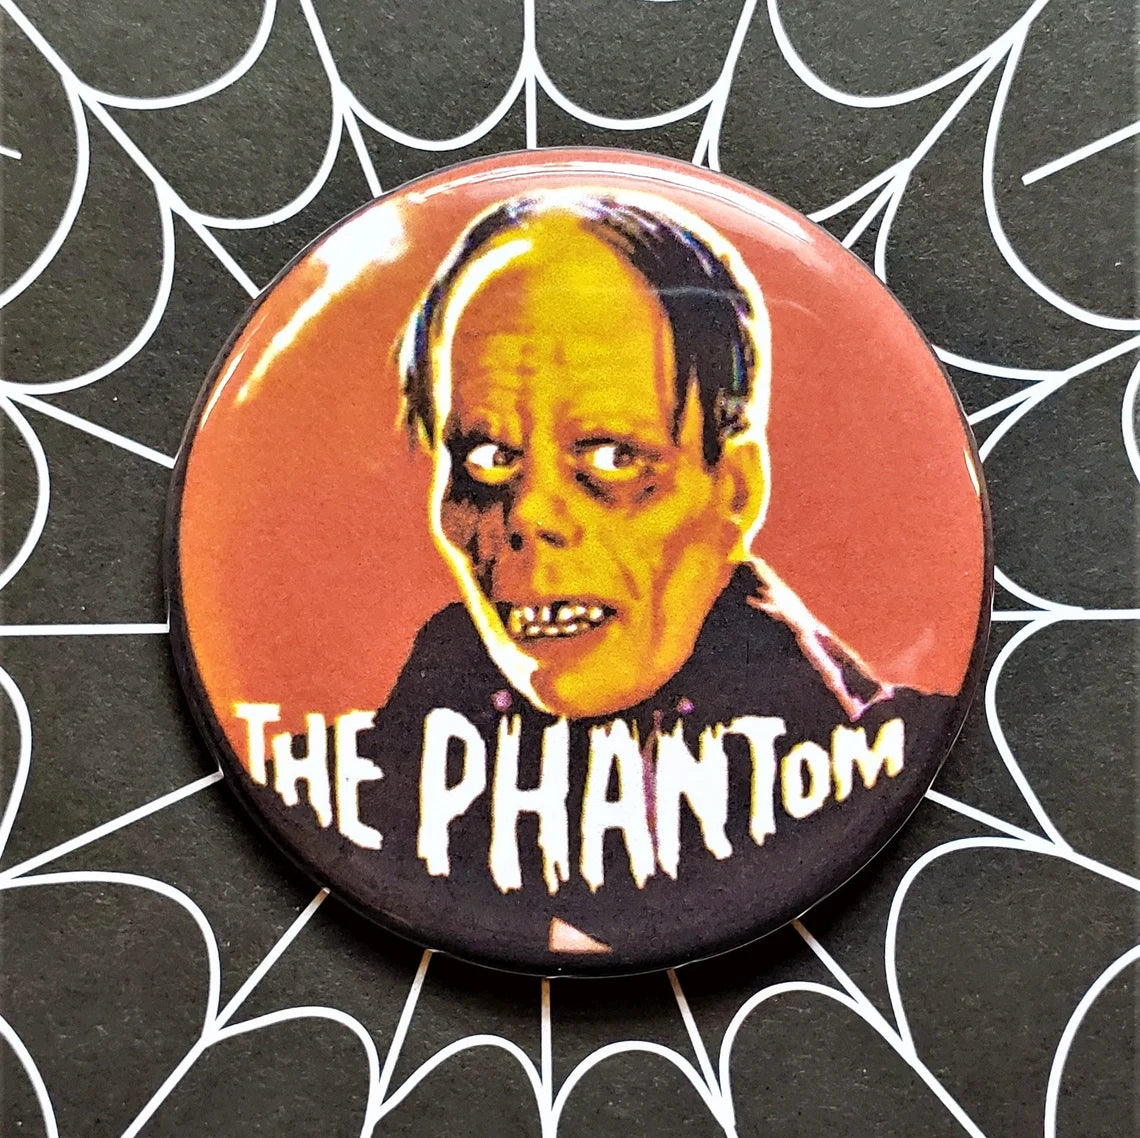 Famous Monsters 1970s pinback Buttons & Bottle Openers.